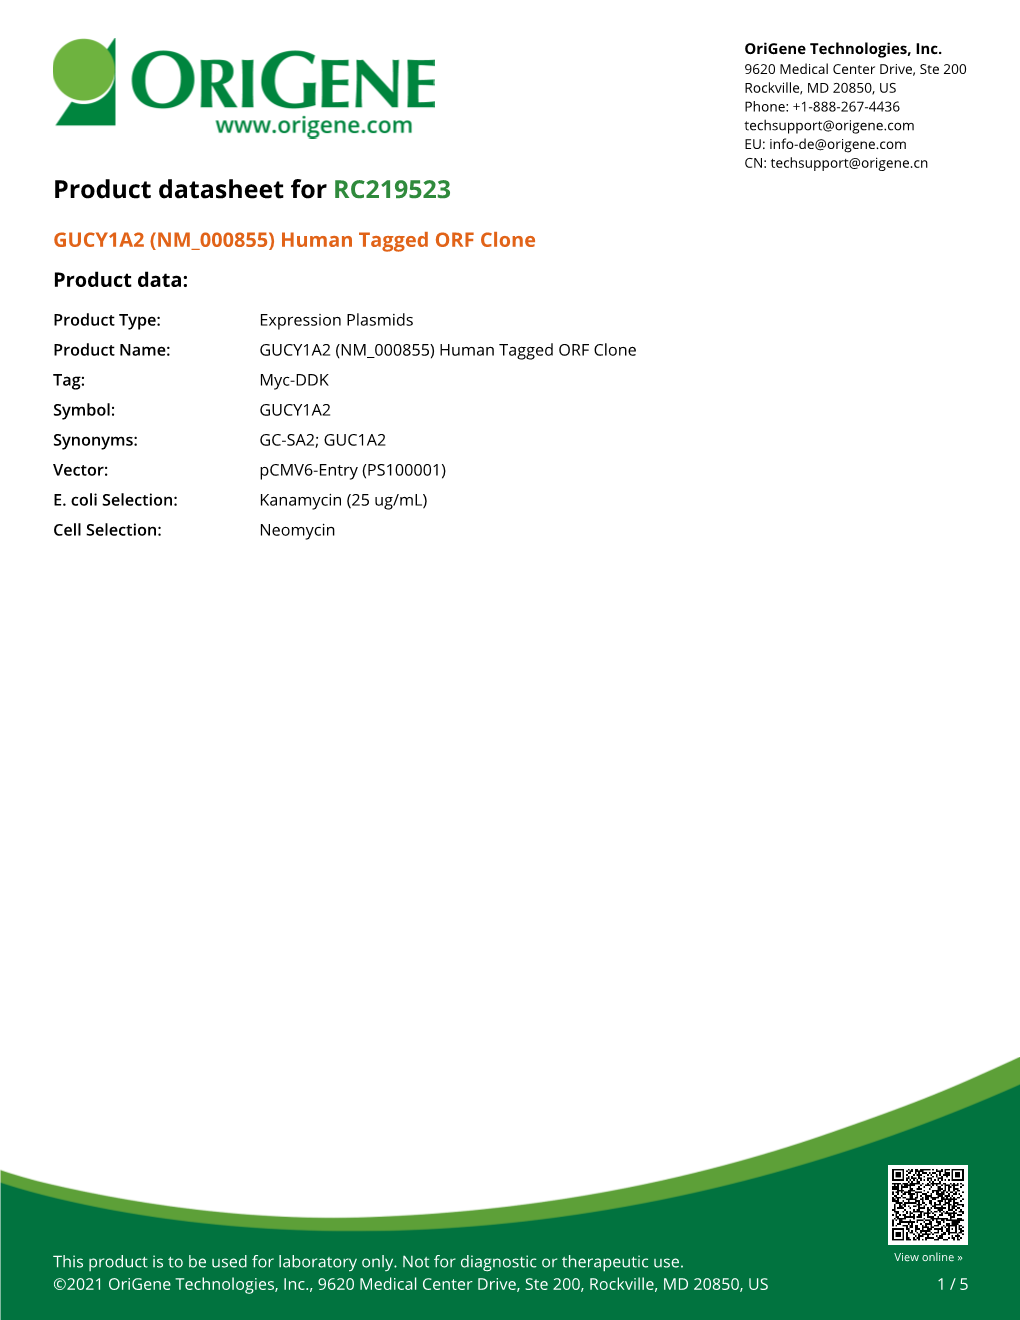 GUCY1A2 (NM 000855) Human Tagged ORF Clone Product Data